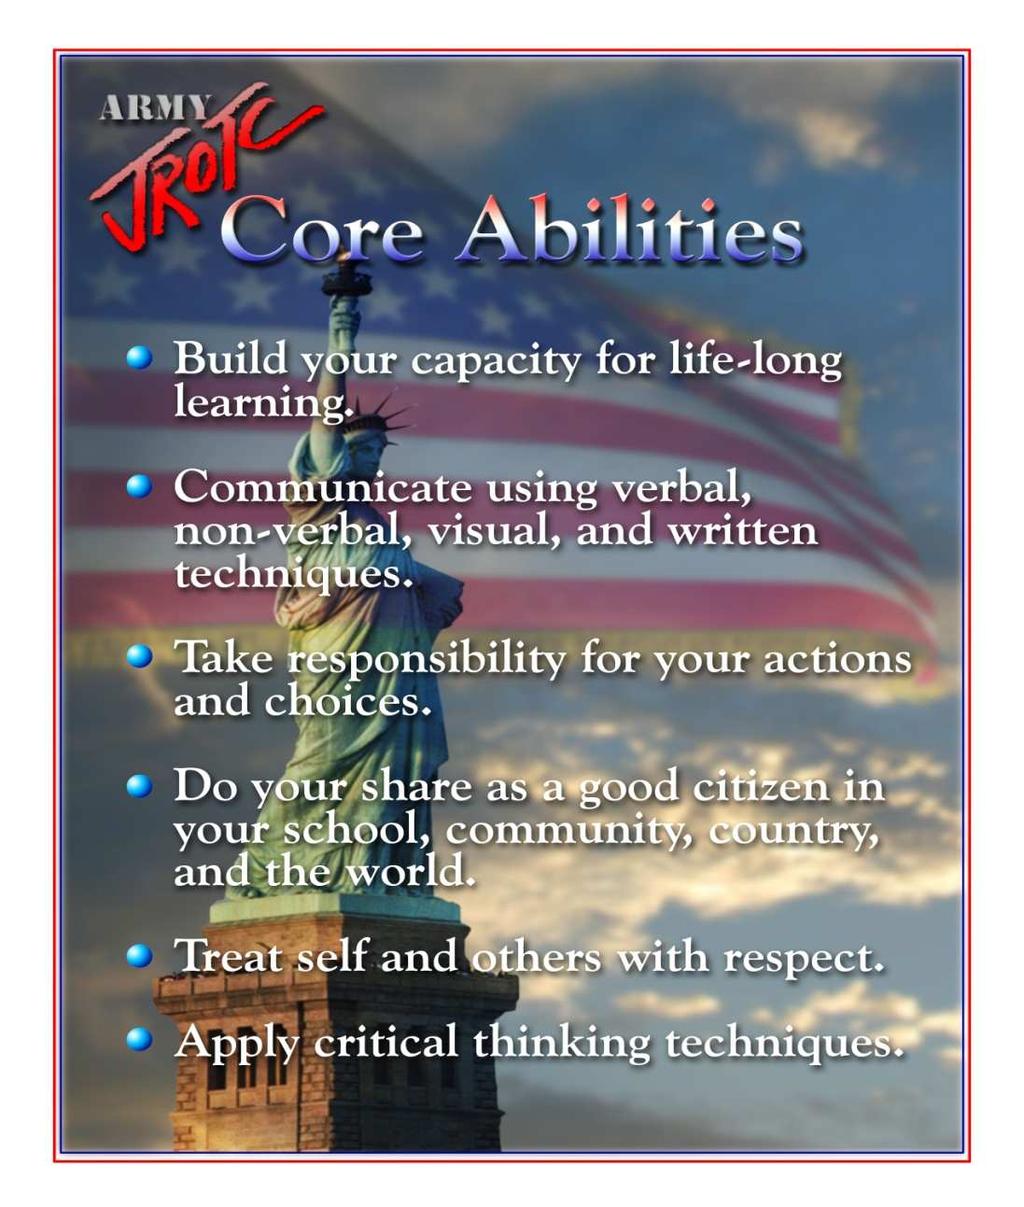 Core Abilities in each lesson